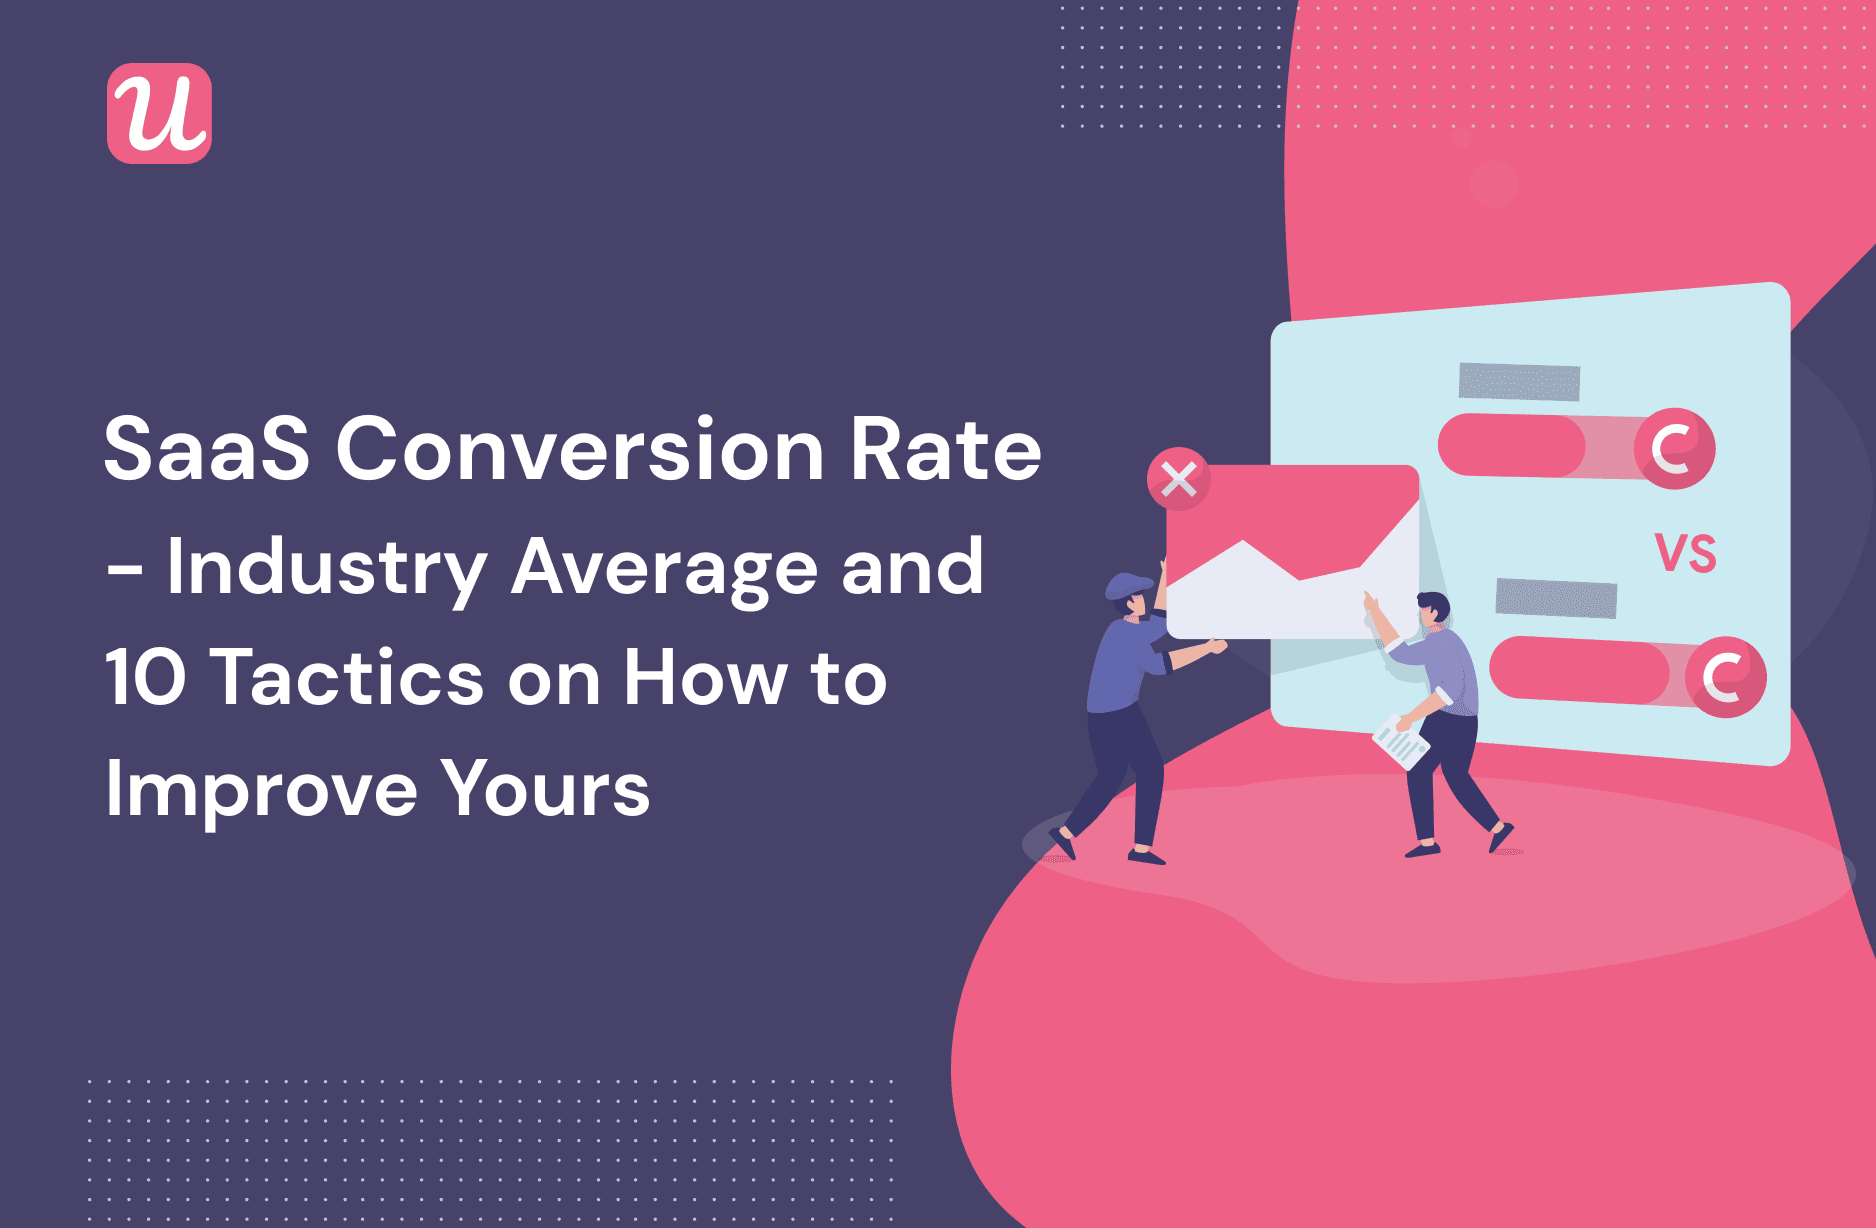 SaaS Conversion Rate- Industry Average and 10 Tactics on How to Improve Yours